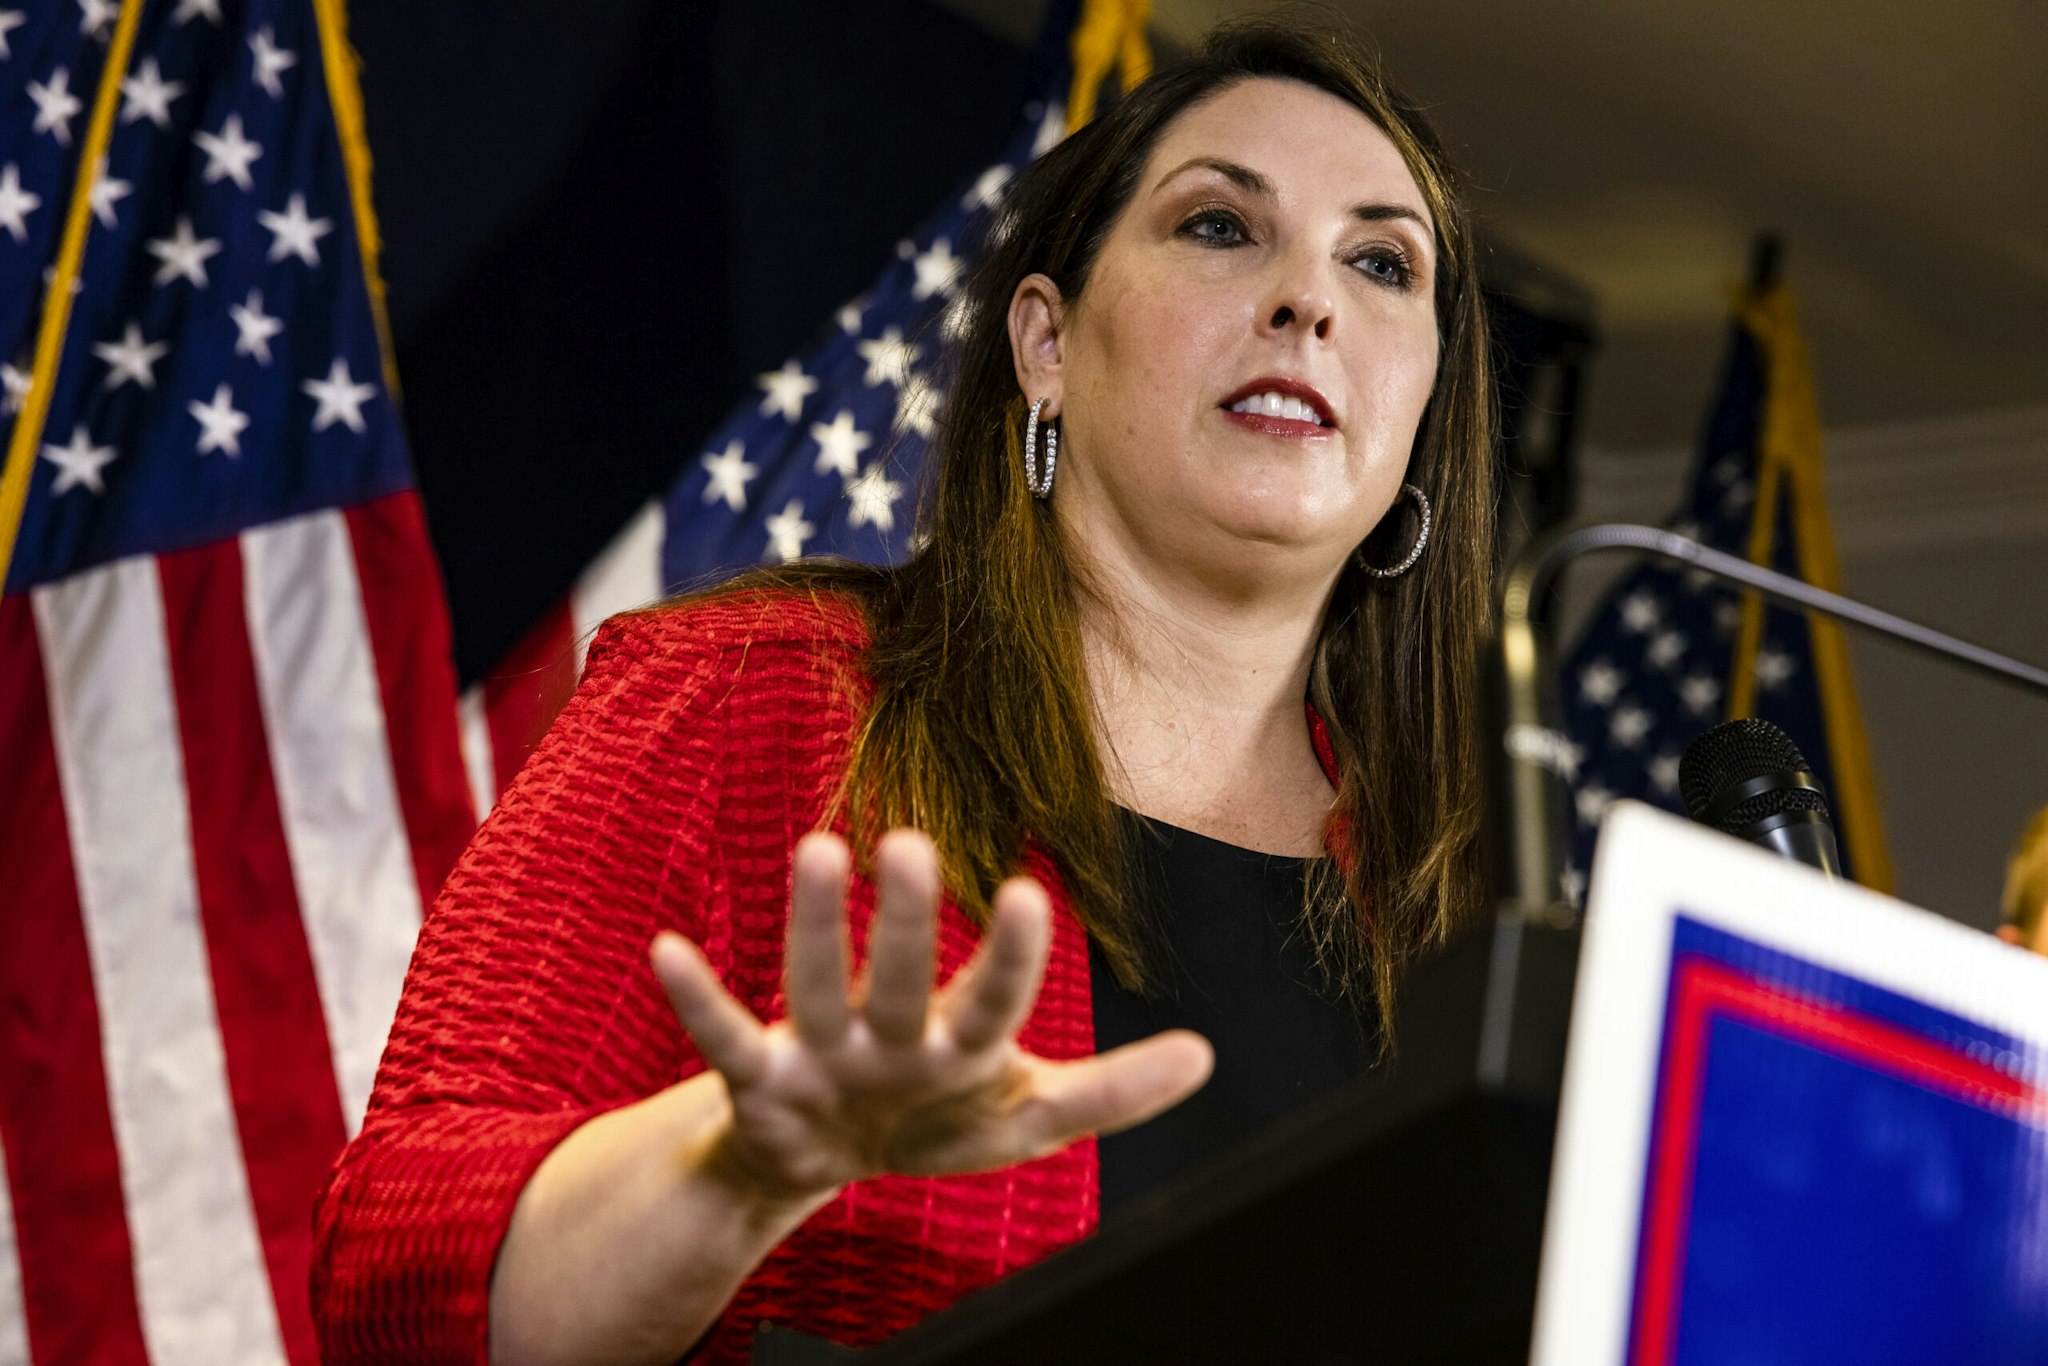 RNC Chairwoman Ronna McDaniel speaks during a press conference at the Republican National Committee headquarters on November 9, 2020 in Washington, DC.